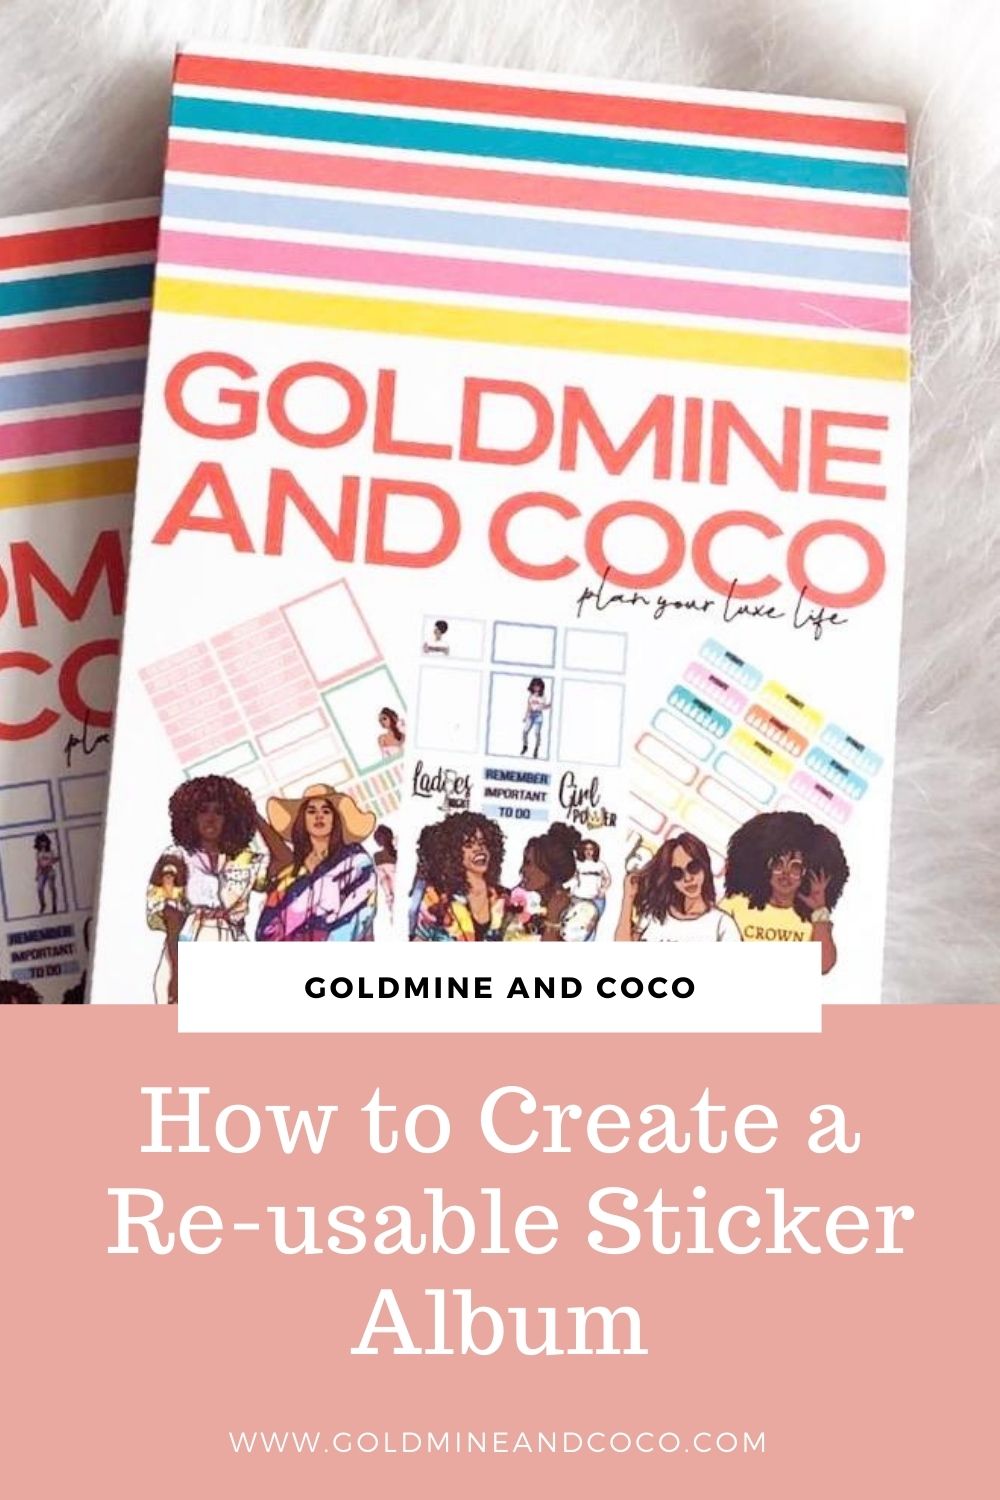 DIY Sticker Books for Kids - Simple Upcycled Project that Reduces Waste!